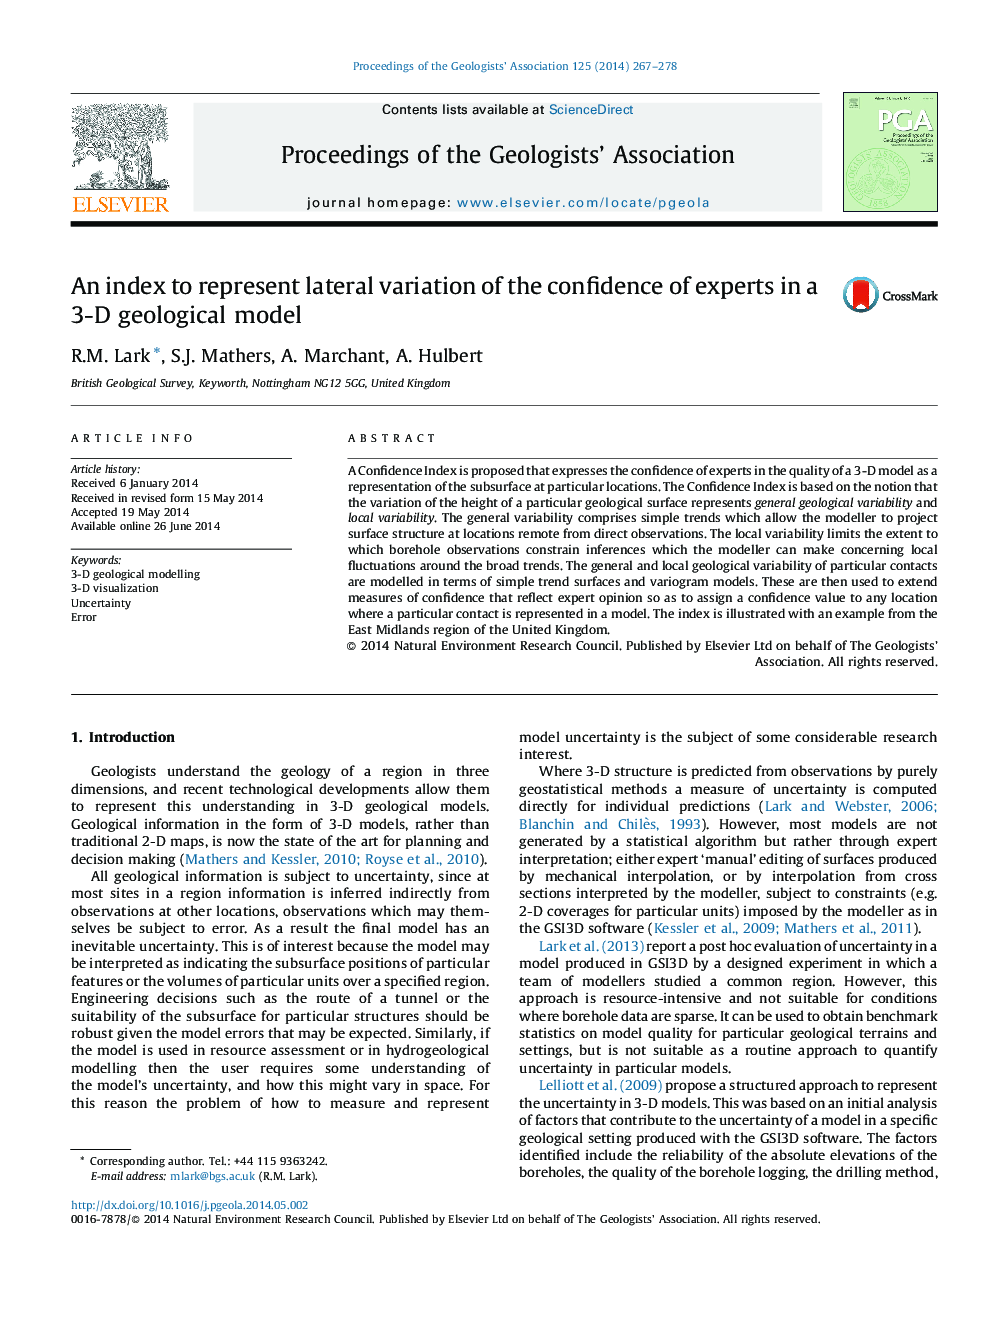 An index to represent lateral variation of the confidence of experts in a 3-D geological model